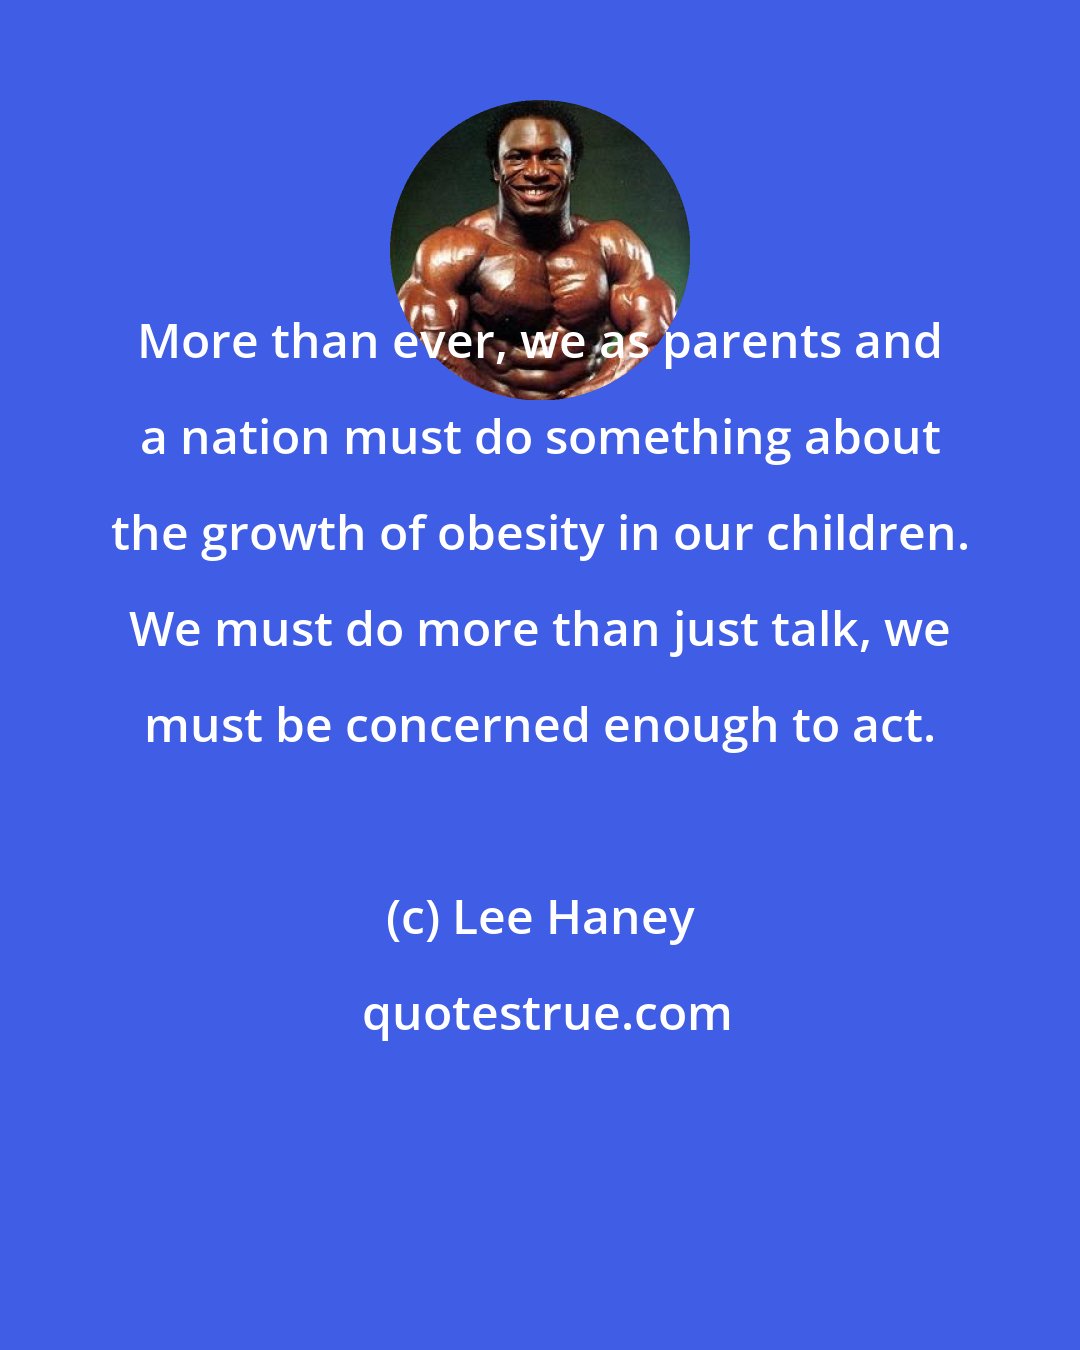 Lee Haney: More than ever, we as parents and a nation must do something about the growth of obesity in our children. We must do more than just talk, we must be concerned enough to act.